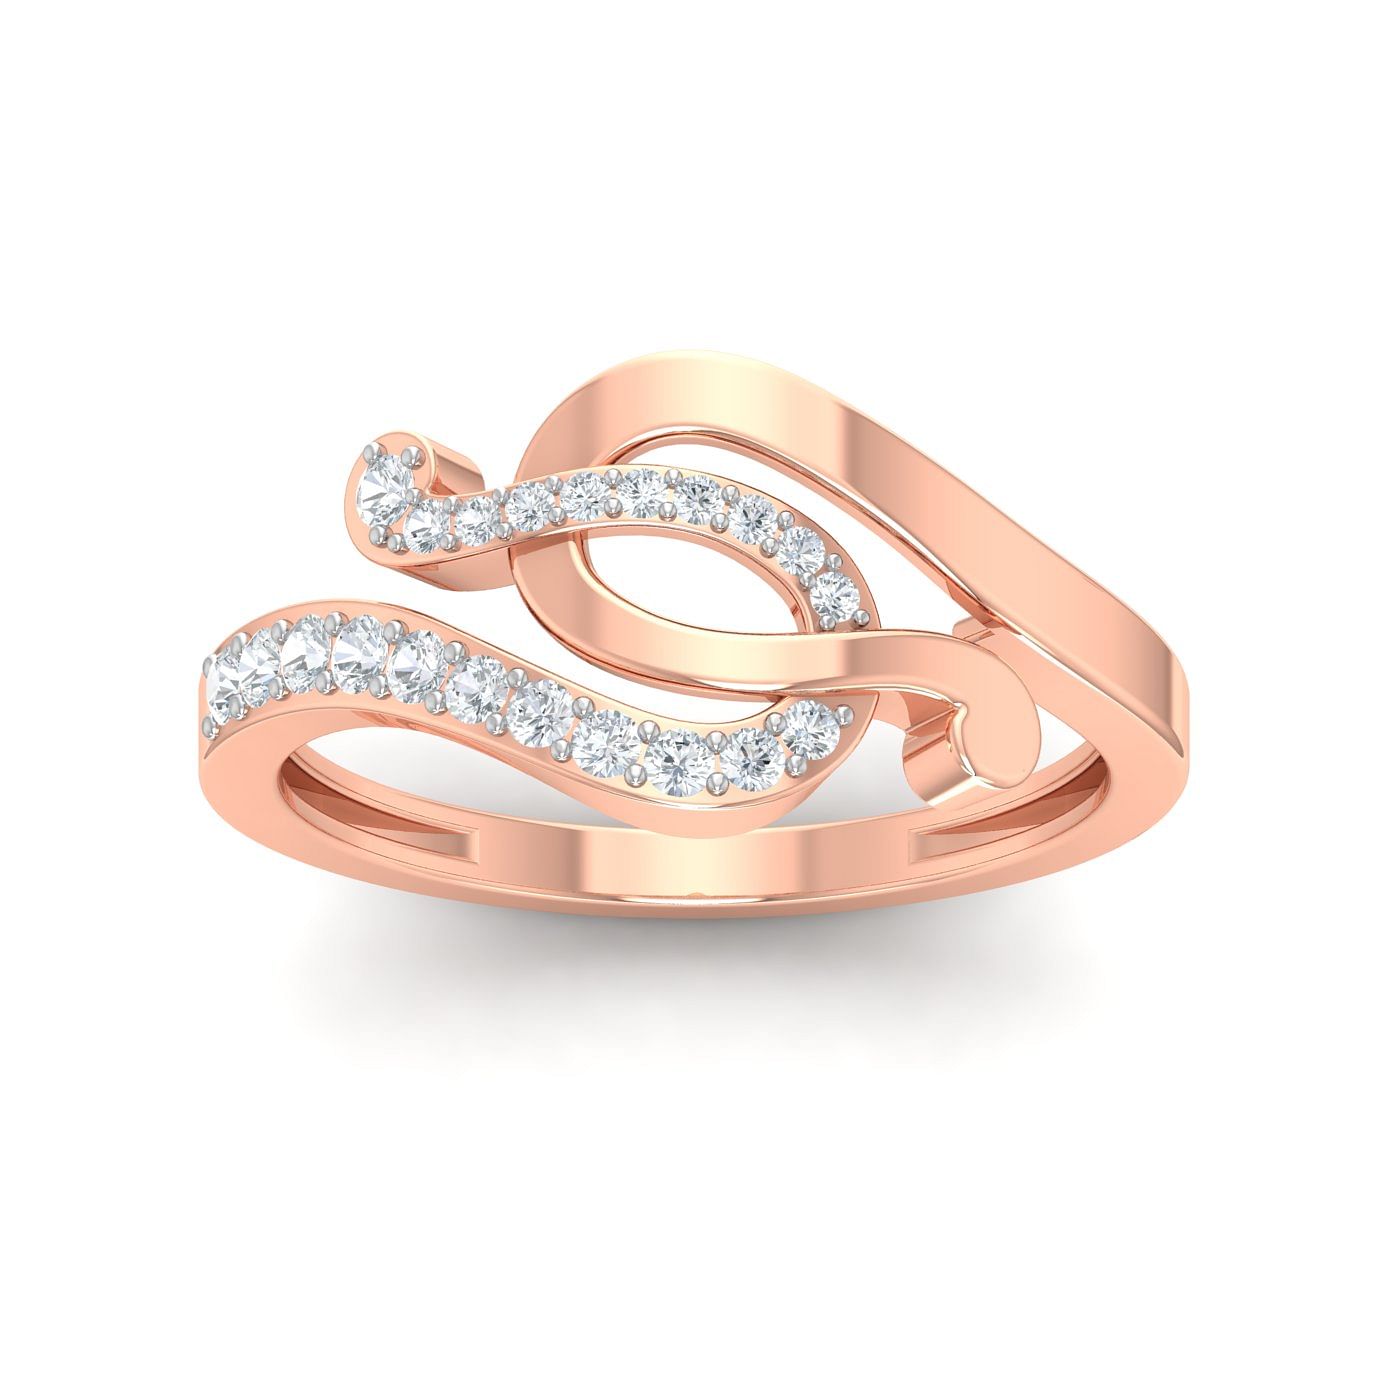 Chunky Gold Knot Diamond Ring With Rose Gold